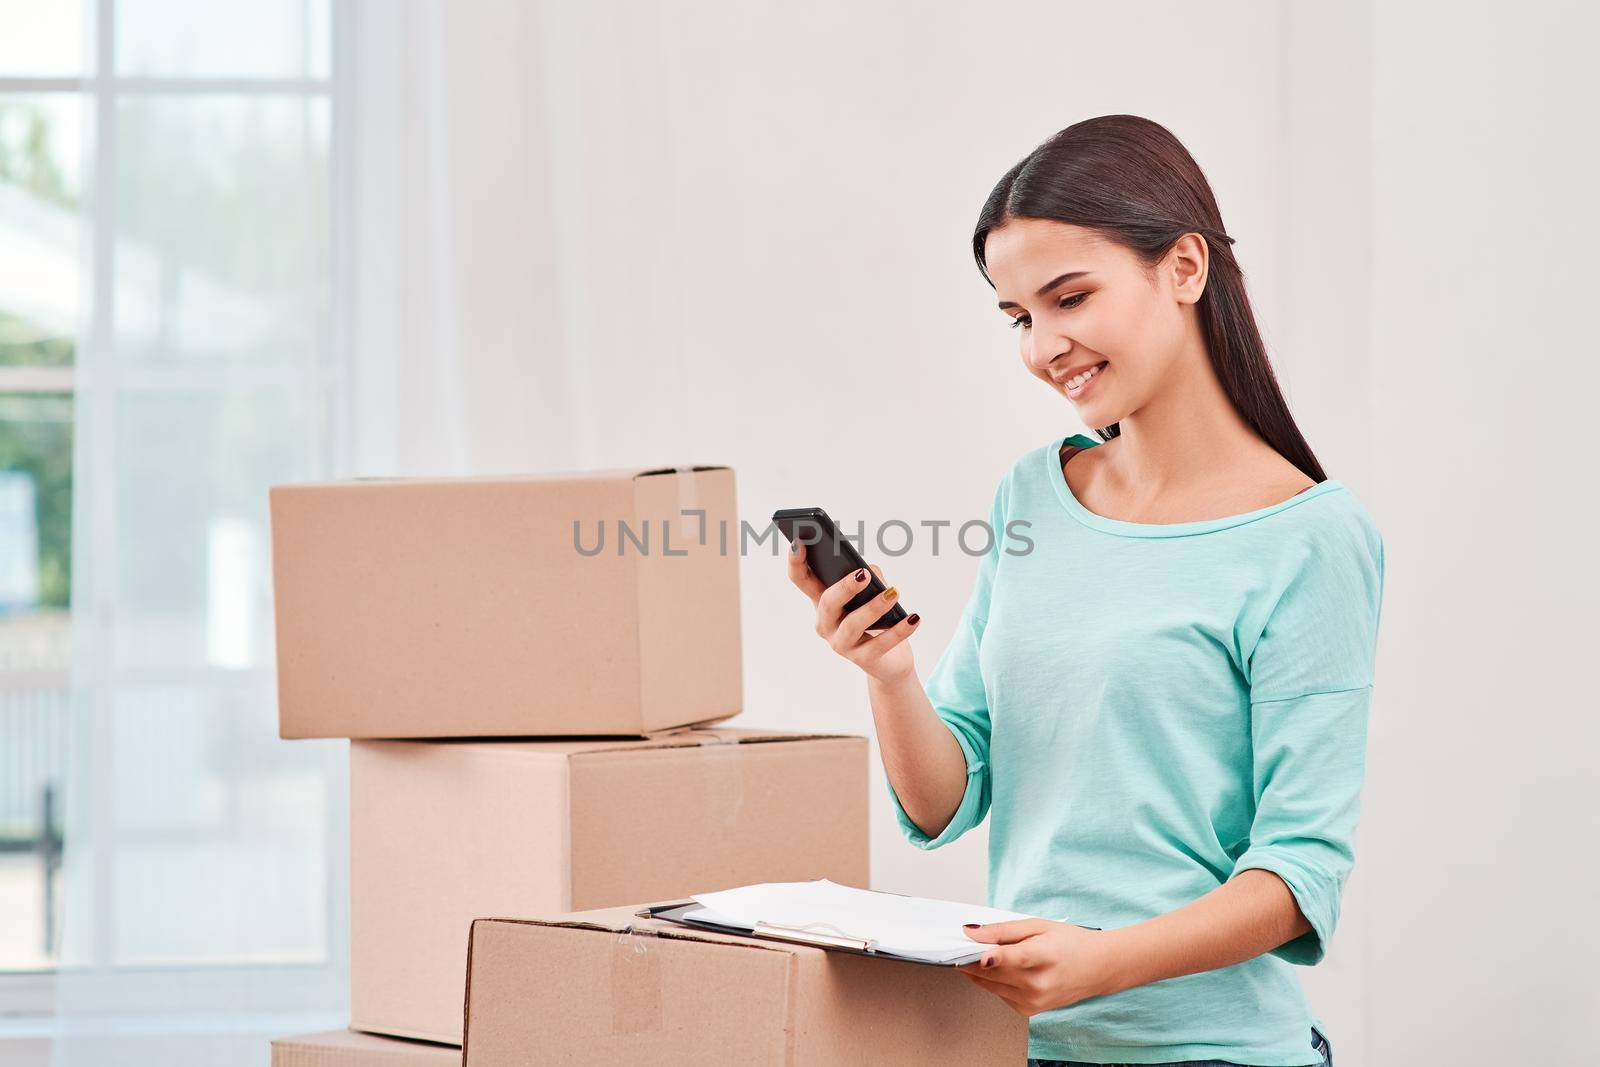 Young entrepreneur, SME, freelance woman working online, business by using smartphone, making purchase, order and preparing packages. Woman standing near stack of boxes, holding a clipboard and looking at her phone